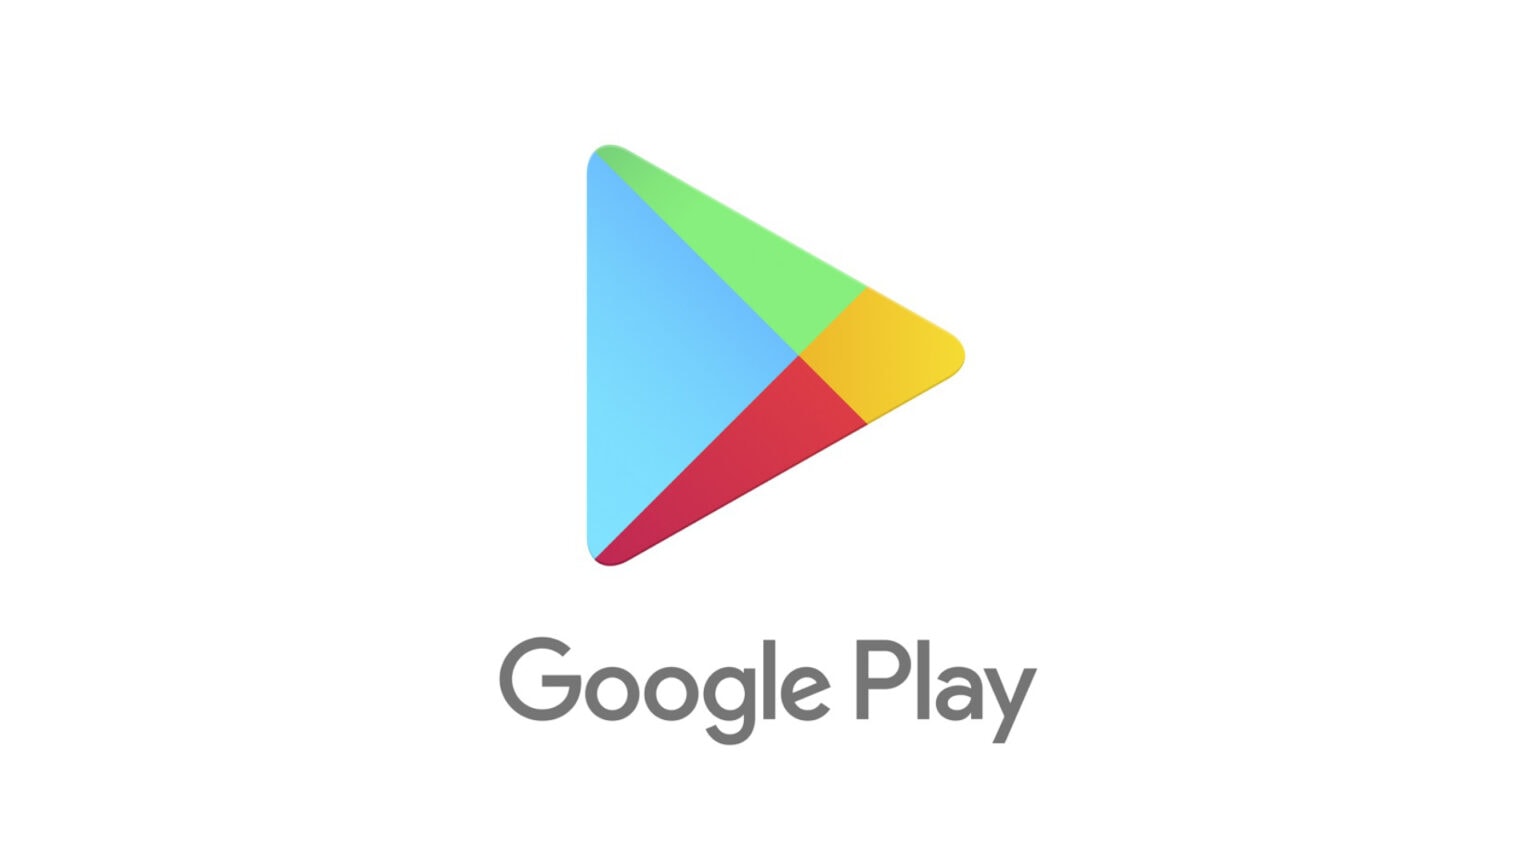 Google tests third-party payments on Android